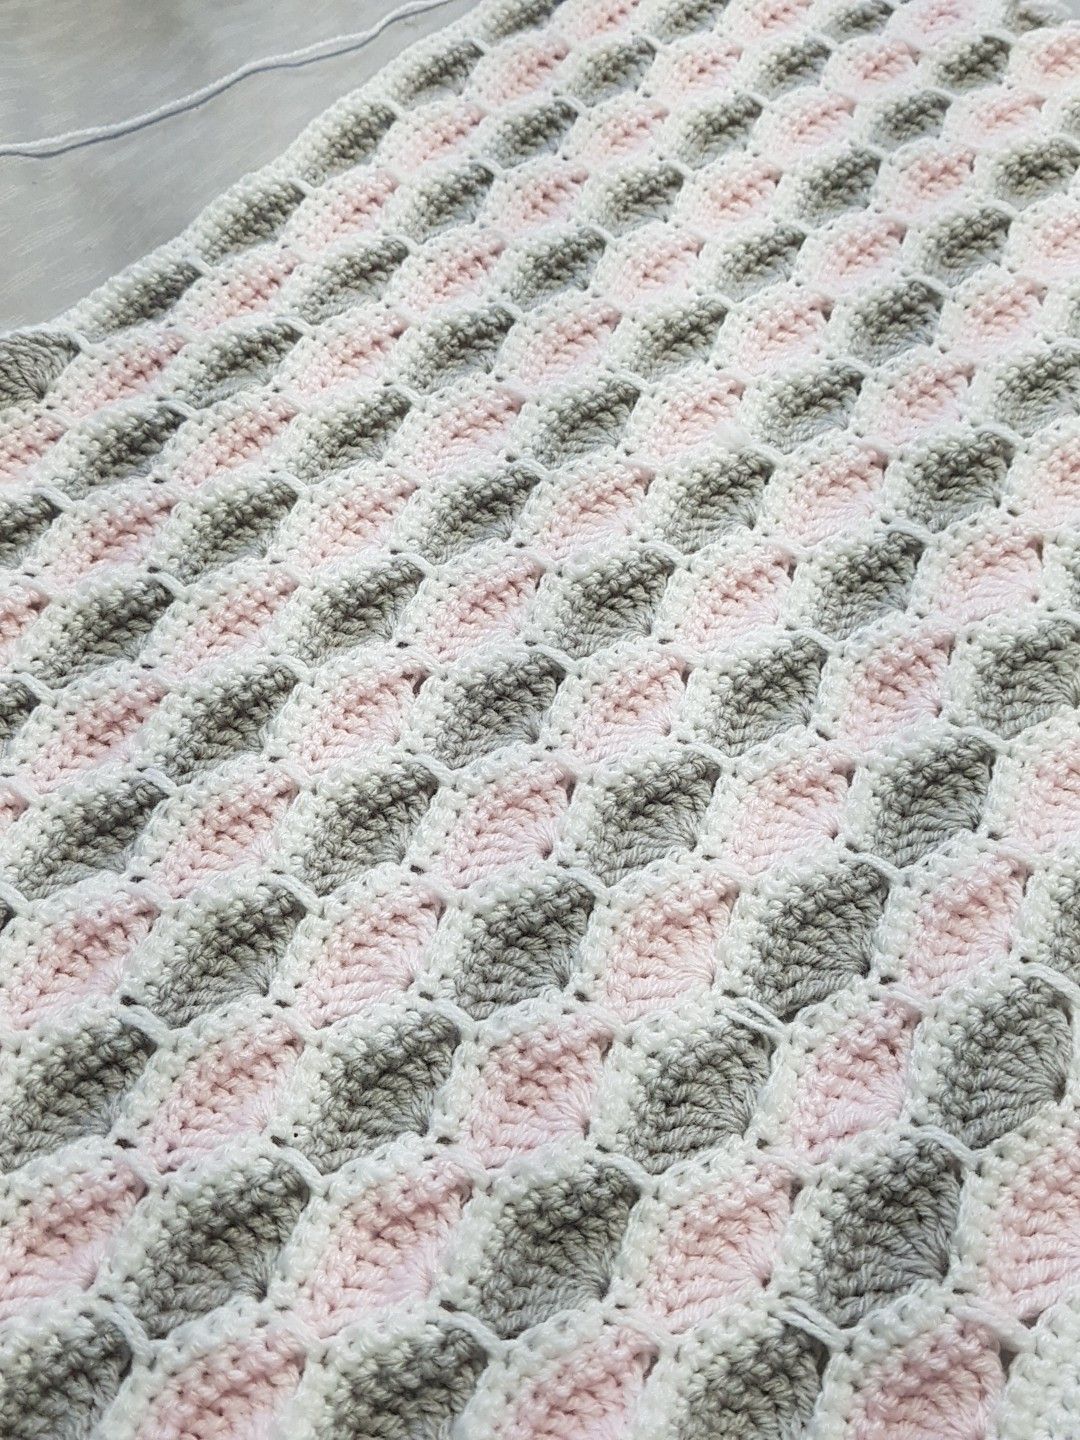 Josephine baby blanket by willow yarns